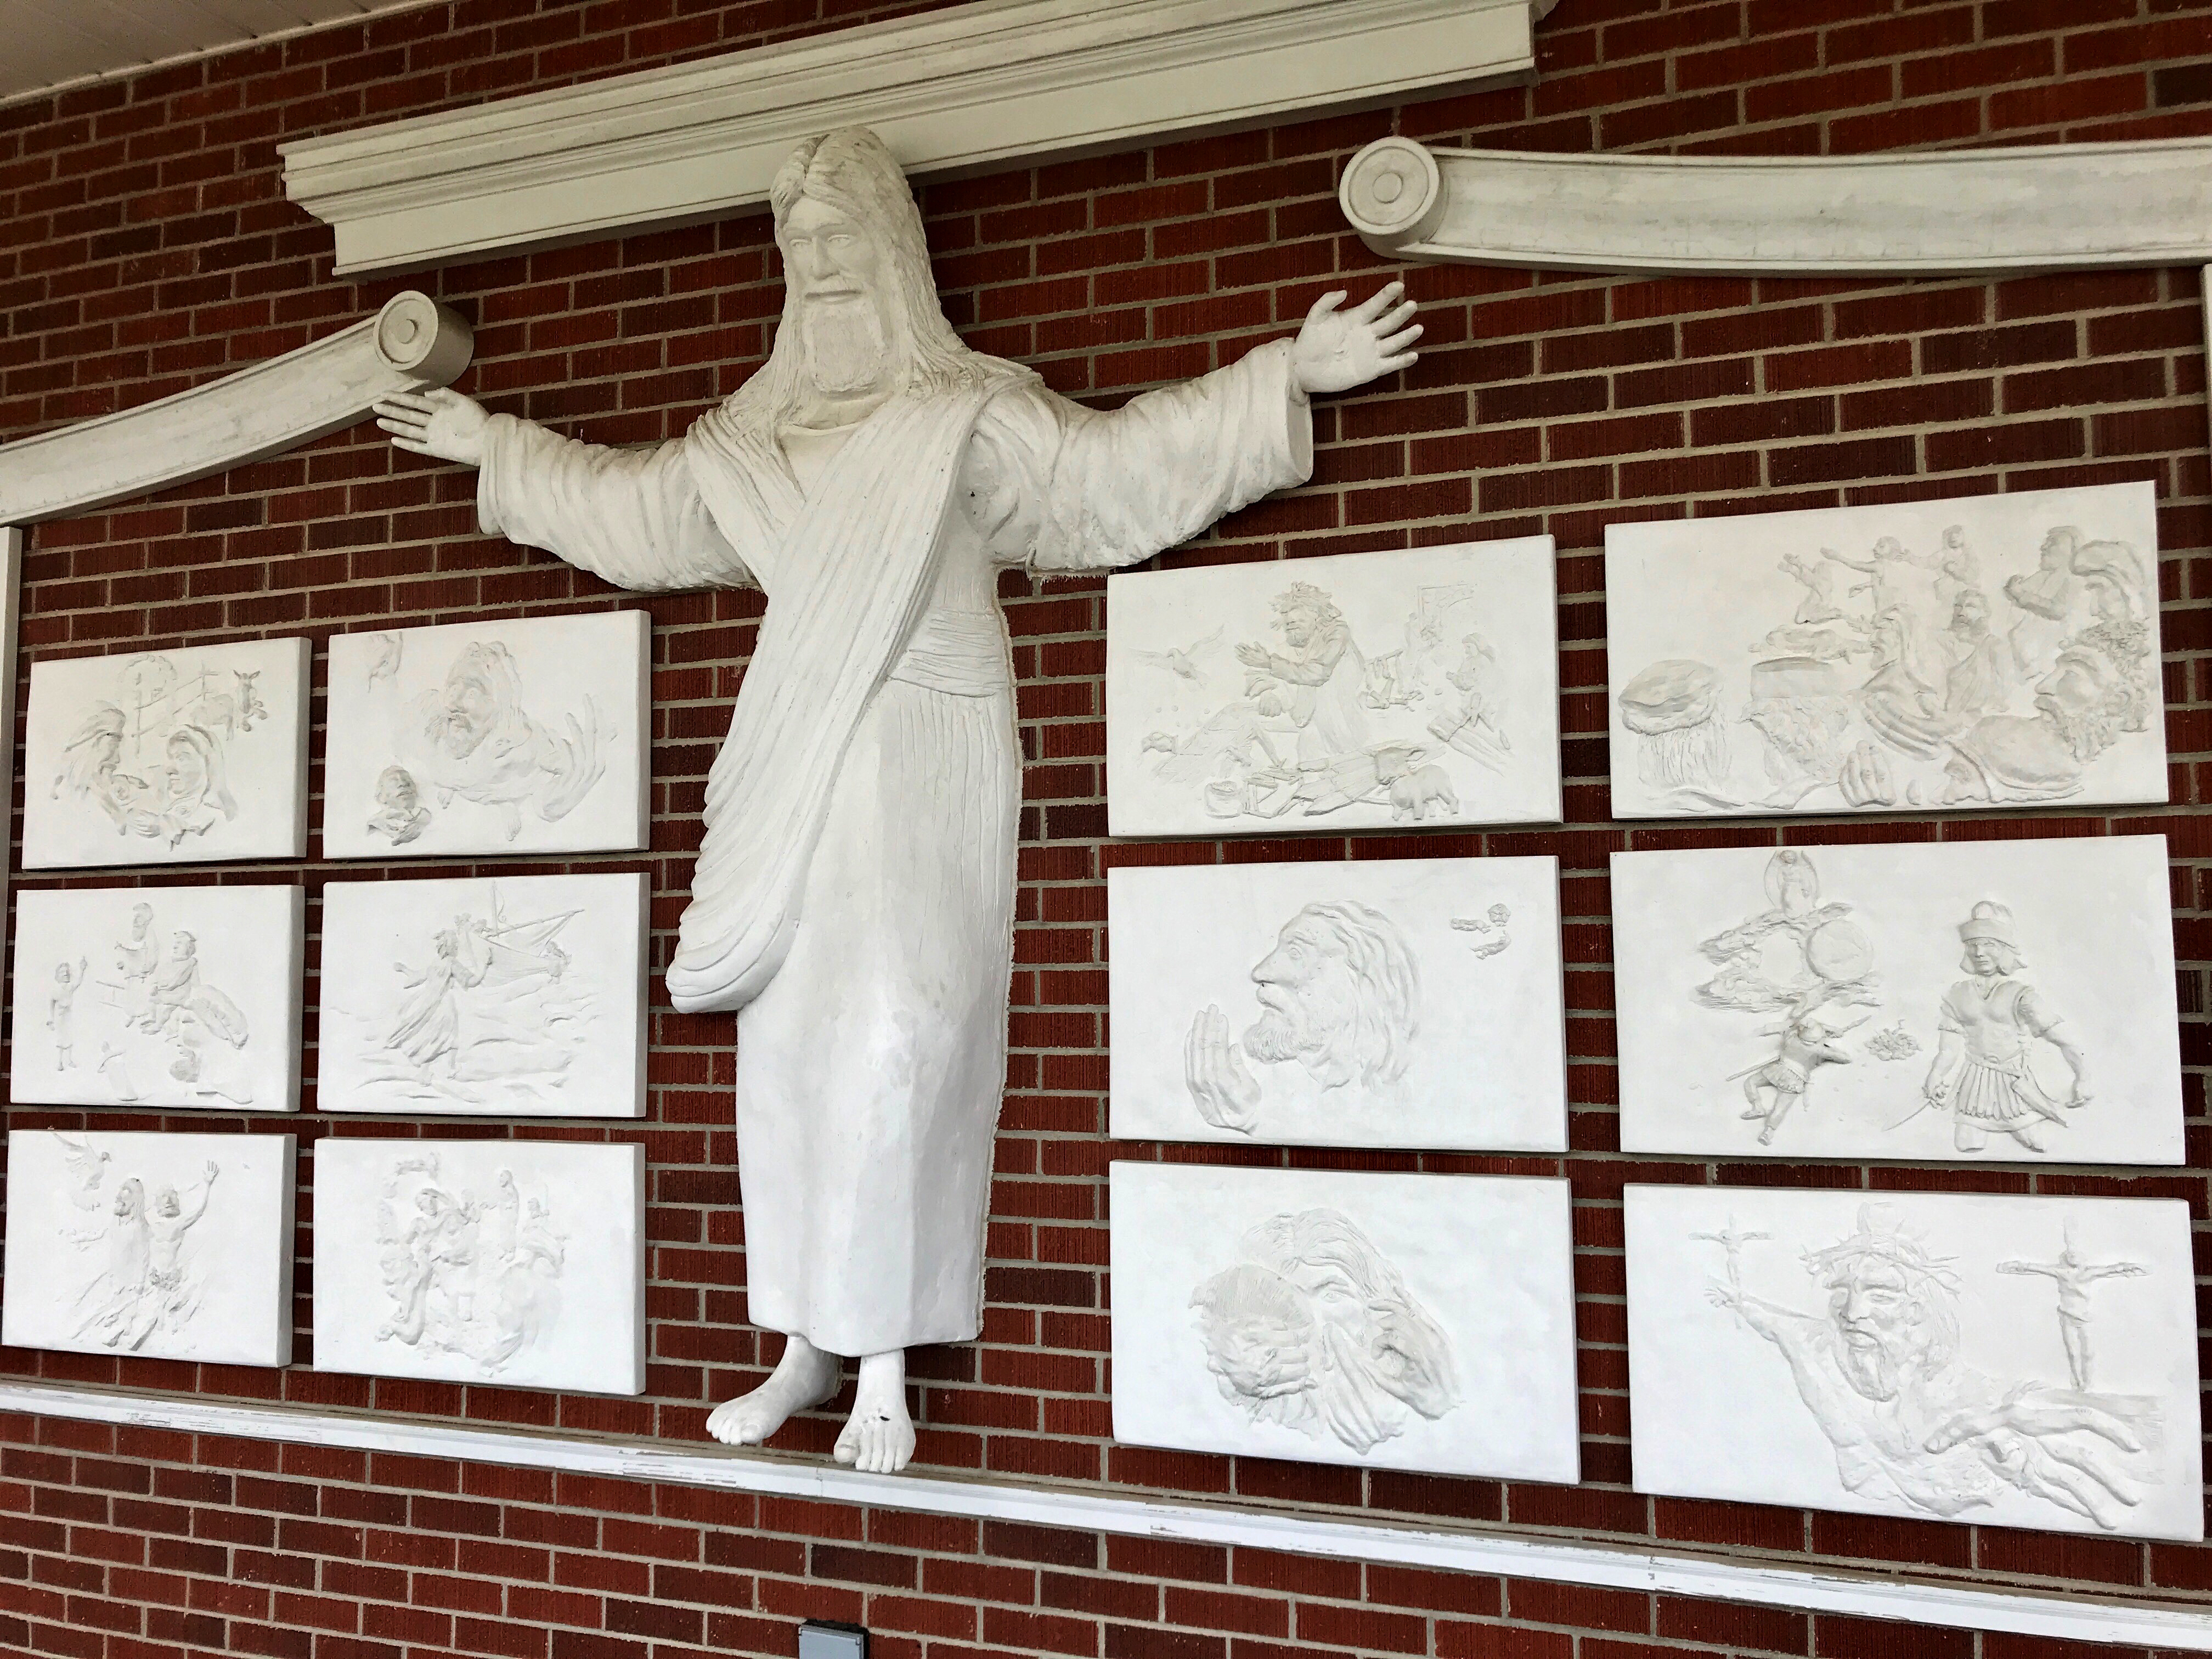 The Jesus statue and reliefs outside of Red Bank Baptist Church in Lexington, South Carolina.